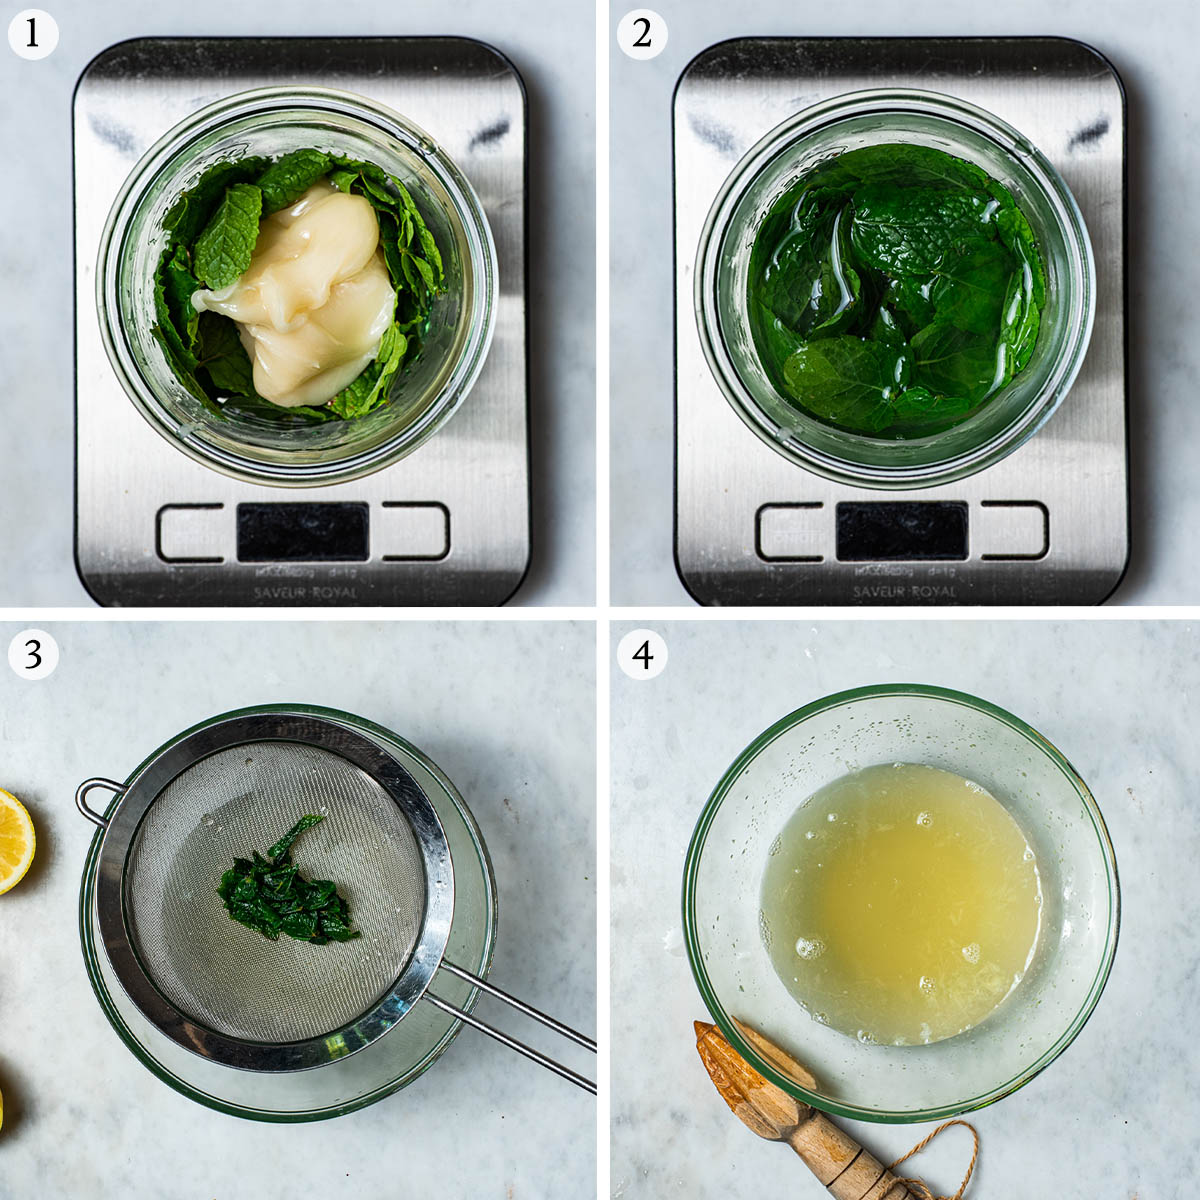 Mint lemonade steps 1 to 4, making the syrup and straining it.